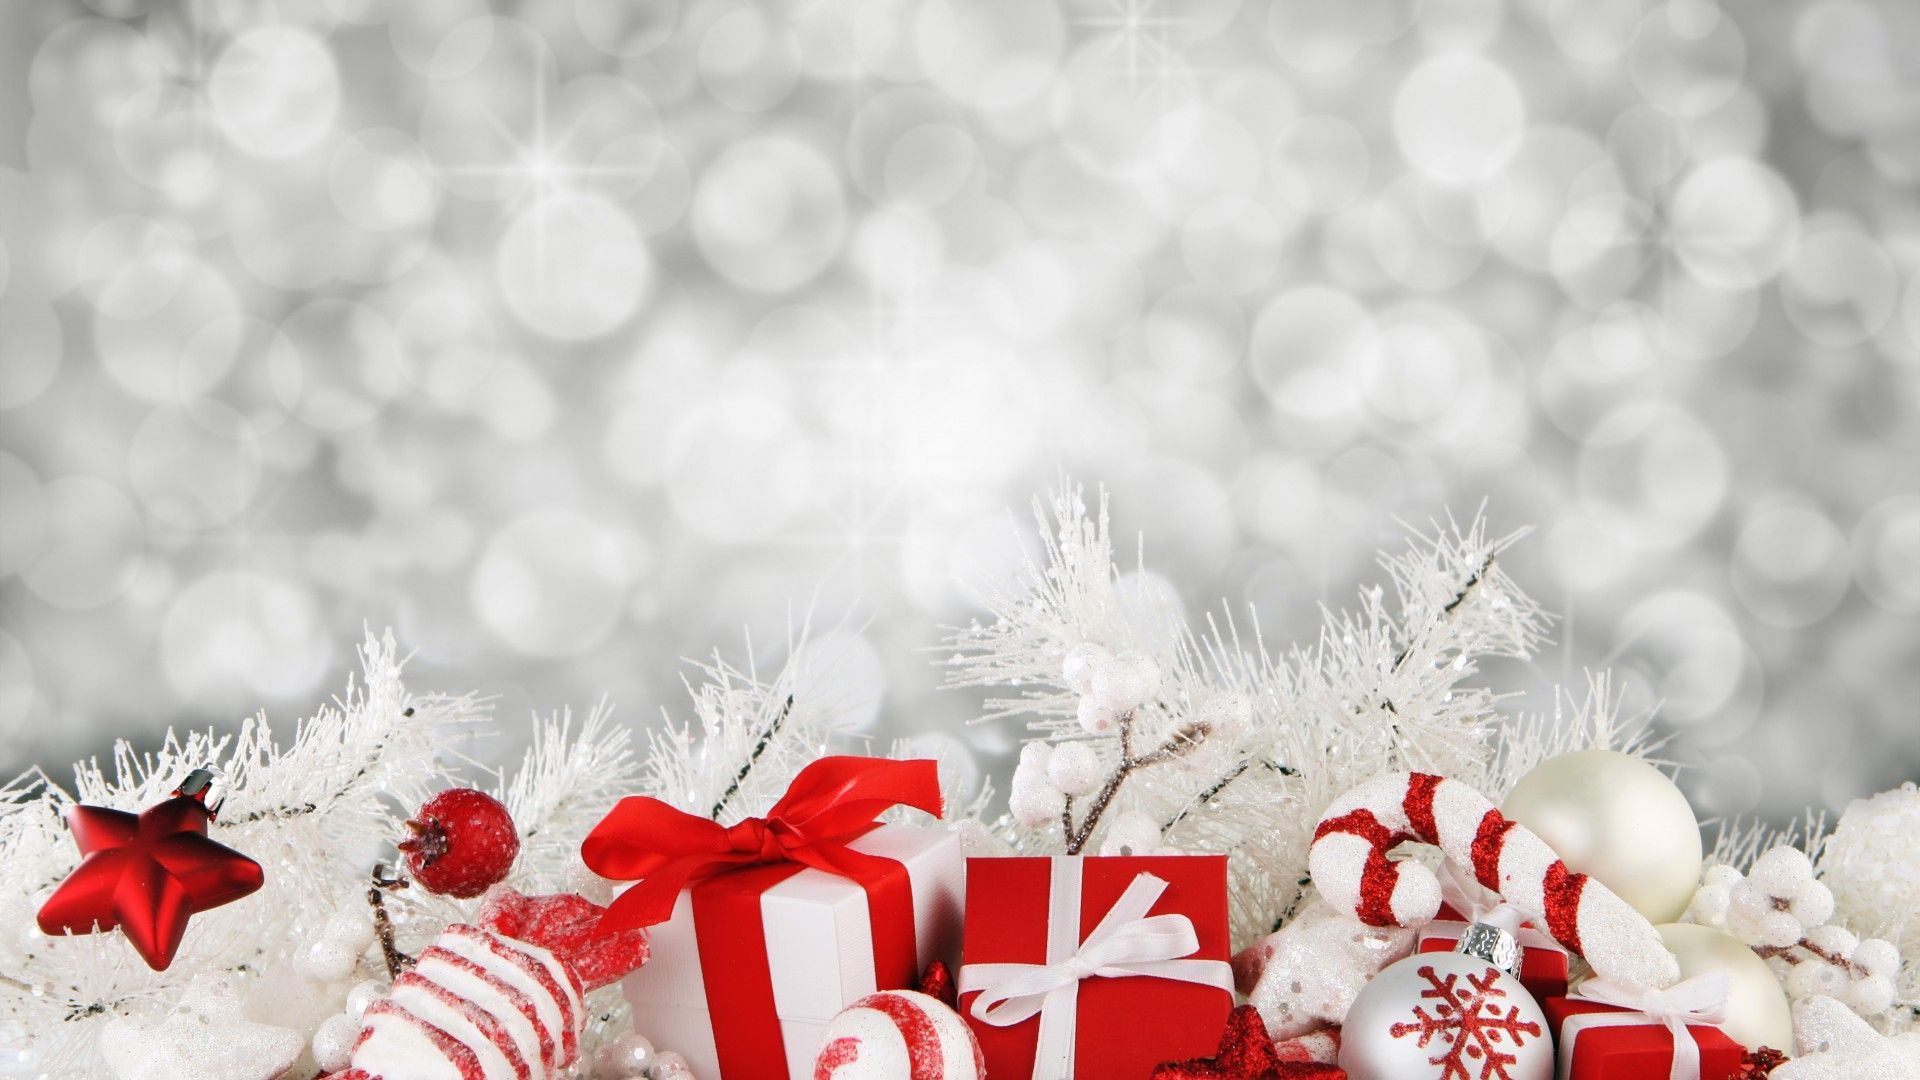 Christmas wallpaper with a red and white theme - White Christmas